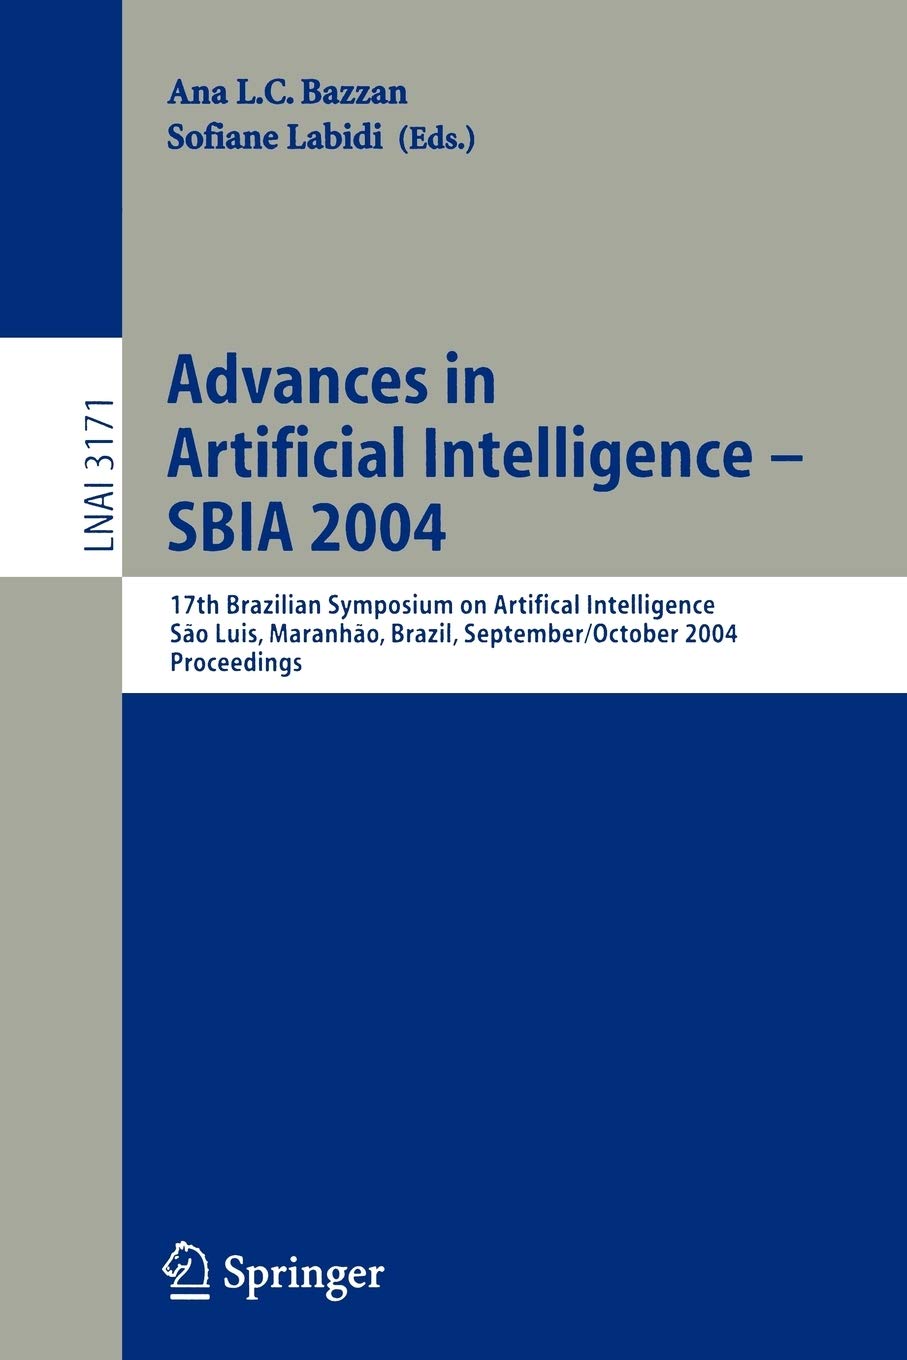 Advances in Artificial Intelligence - SBIA 2004: 17th Brazilian Symposium on Artificial Intelligence, Sao Luis, Maranhao, Brazil, September 29-October ...